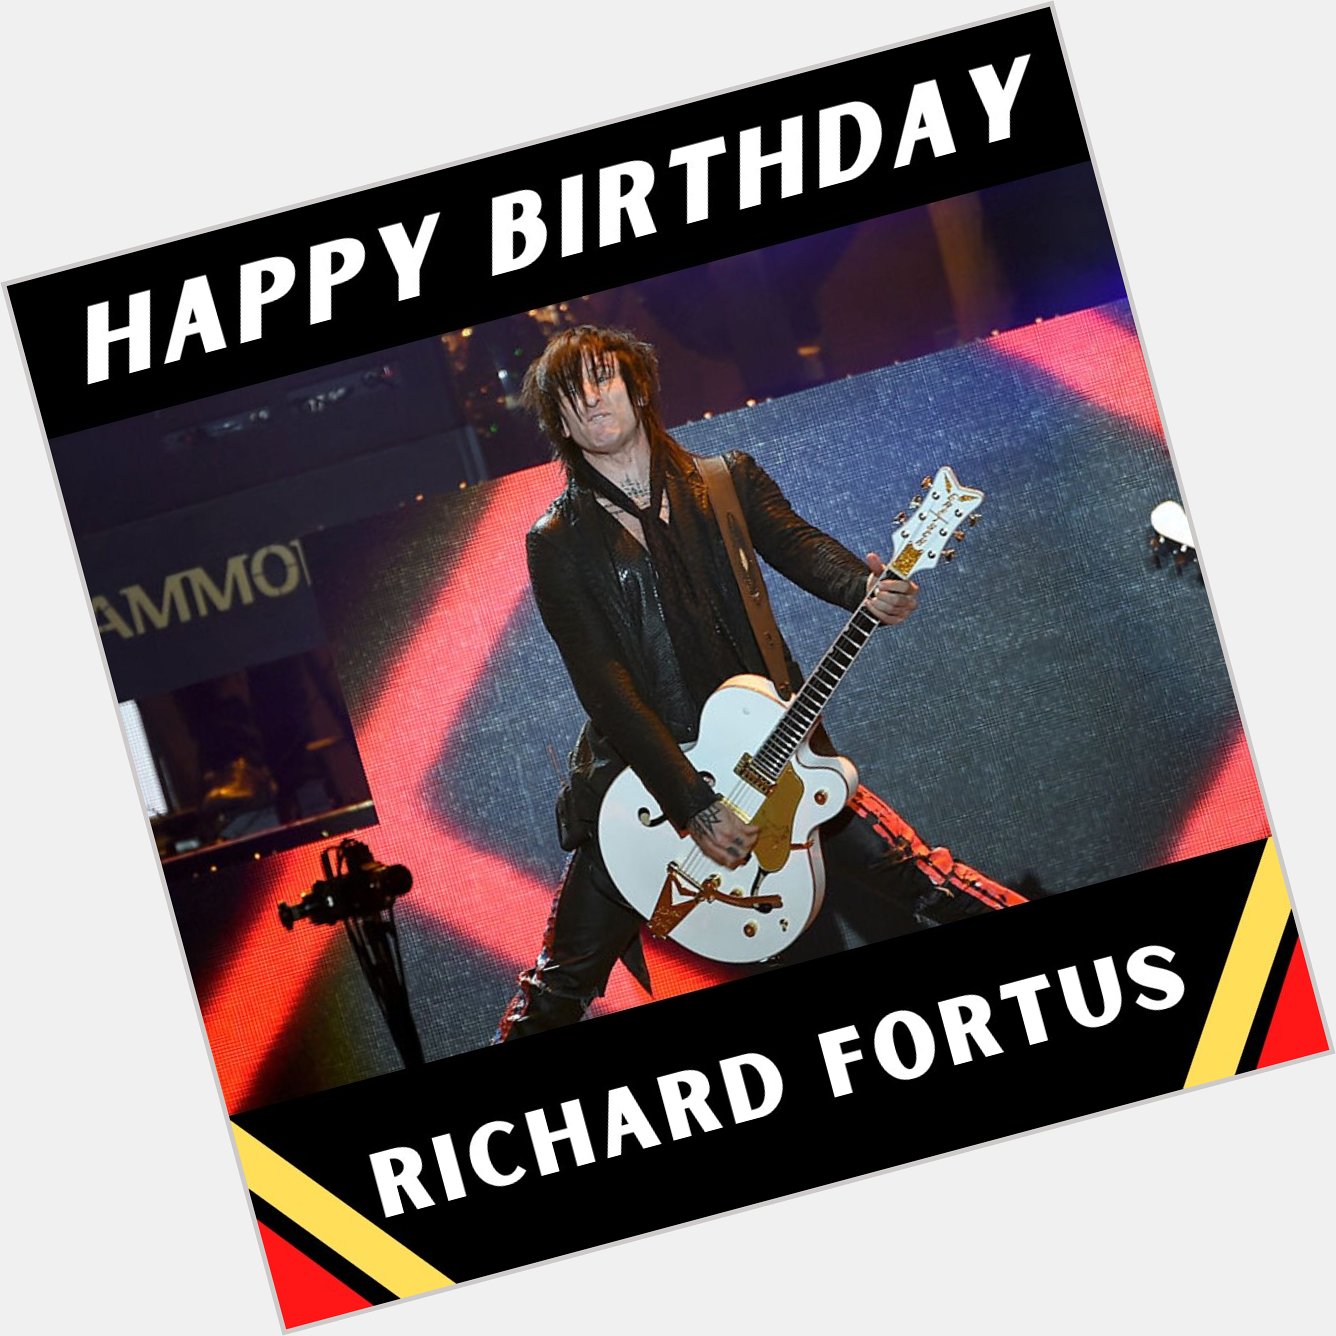 Wishing a happy birthday to Richard Fortus of Guns N\ Roses 

Photo by Kevin Winter/Getty Images for Coachella 